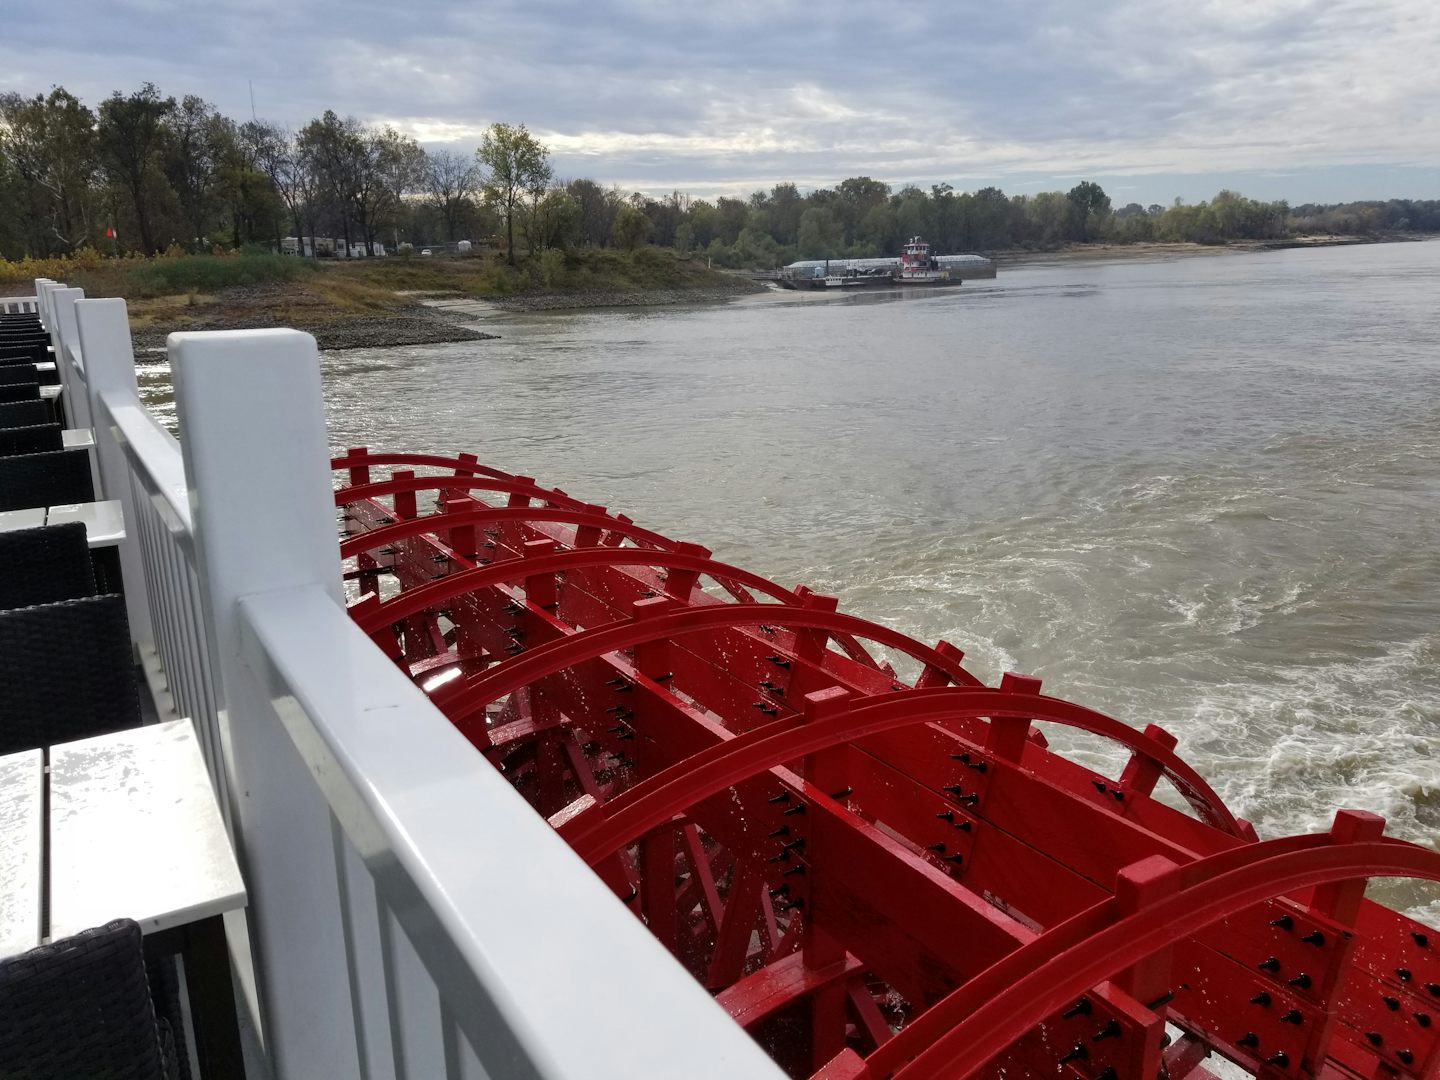 The paddlewheel and the river.